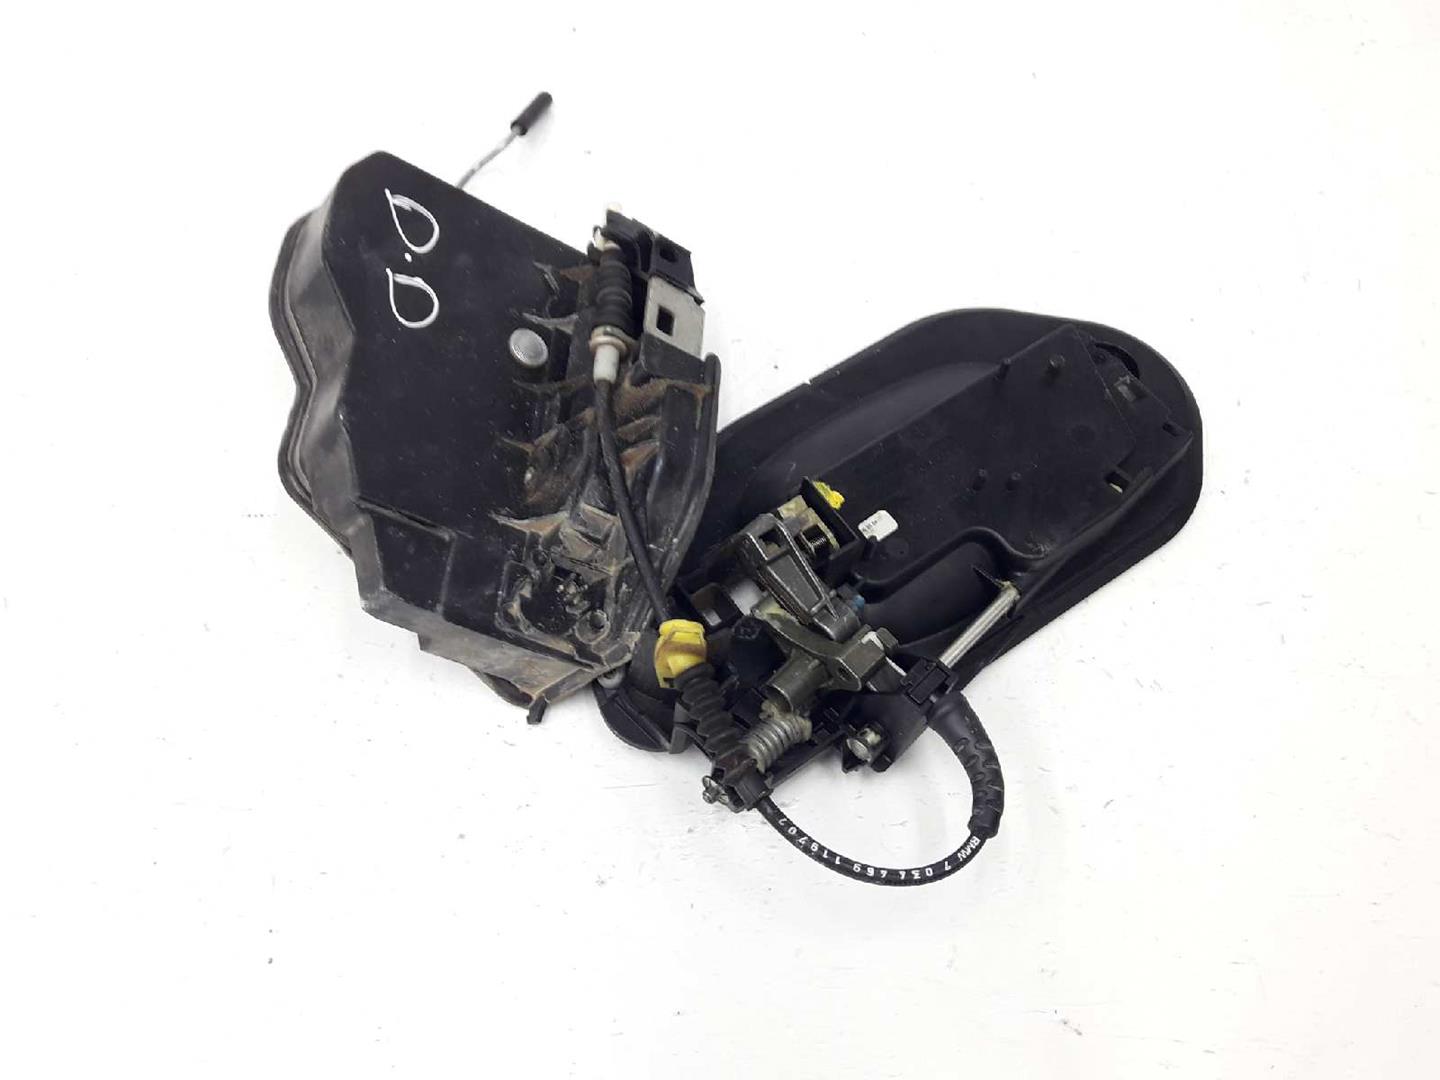 BMW 5 Series E60/E61 (2003-2010) Front Right Door Lock 7154628, 7PINES, 51217202146 19593316